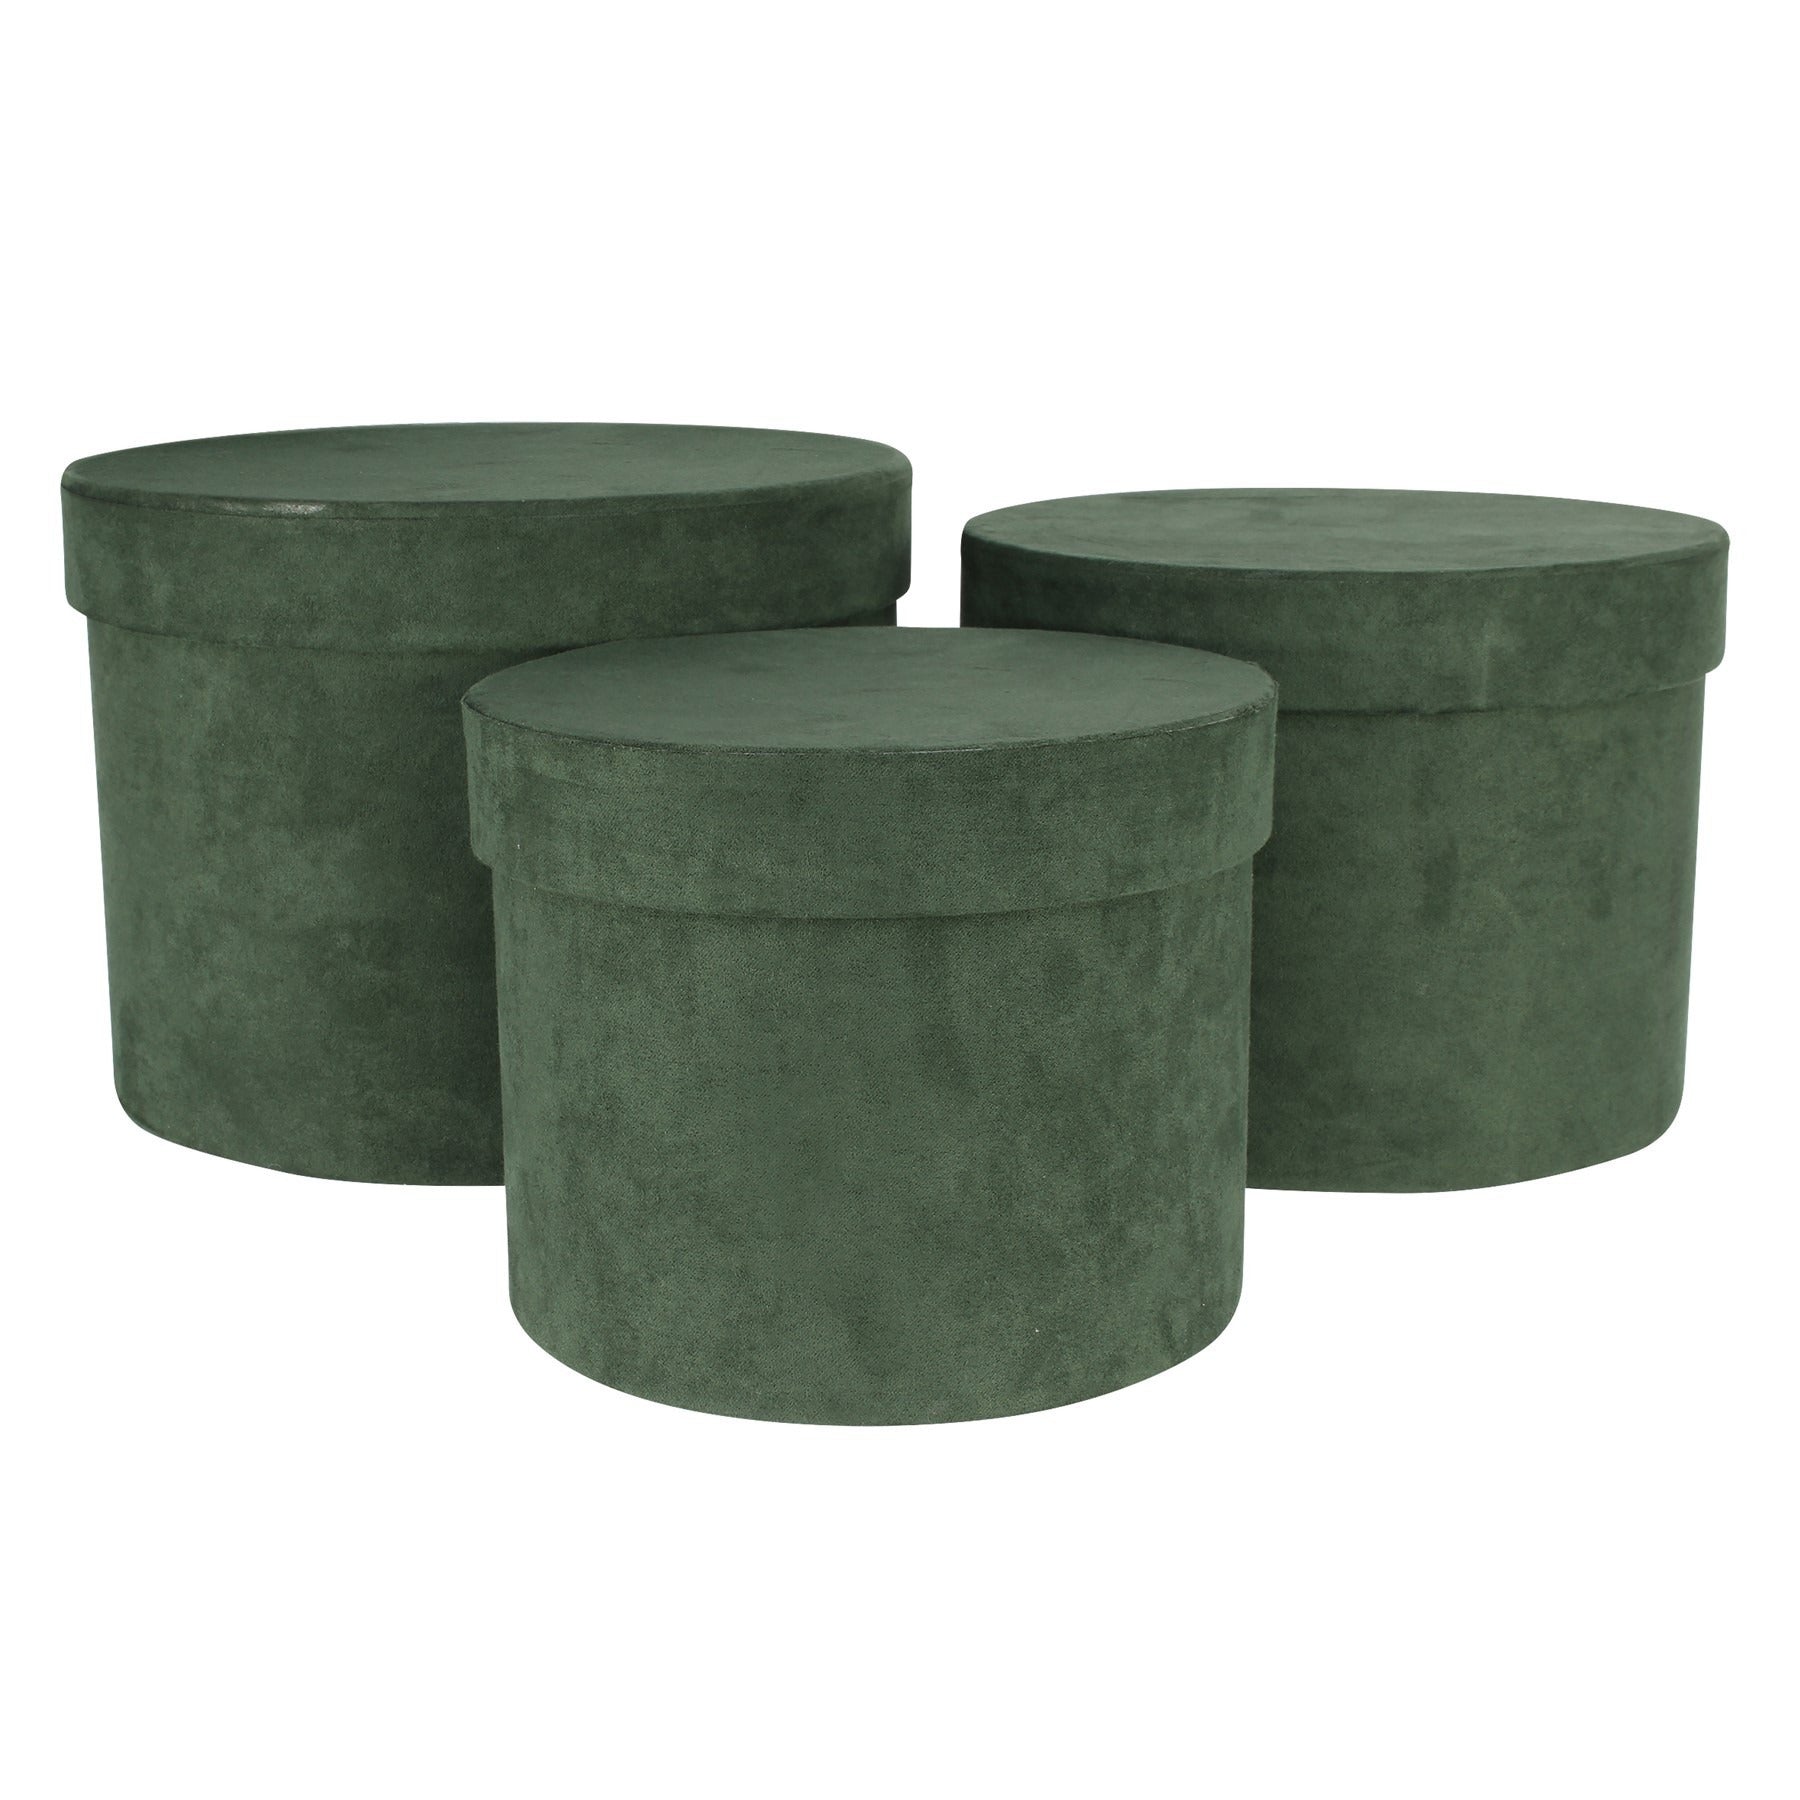 View Set of 3 Green Suede Hat Boxes information